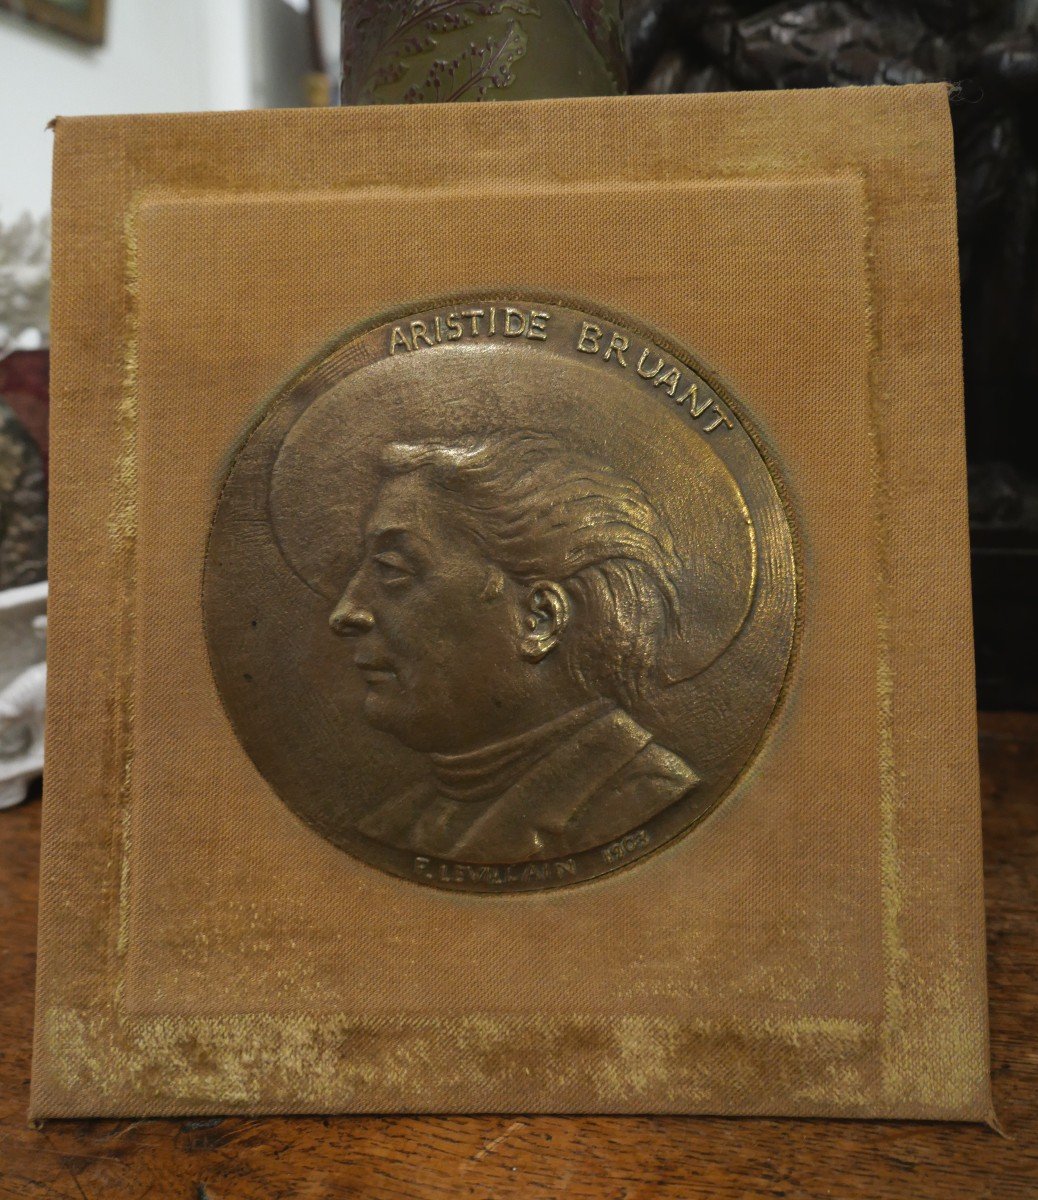 Medallion Of Aristide Bruant By Levillain